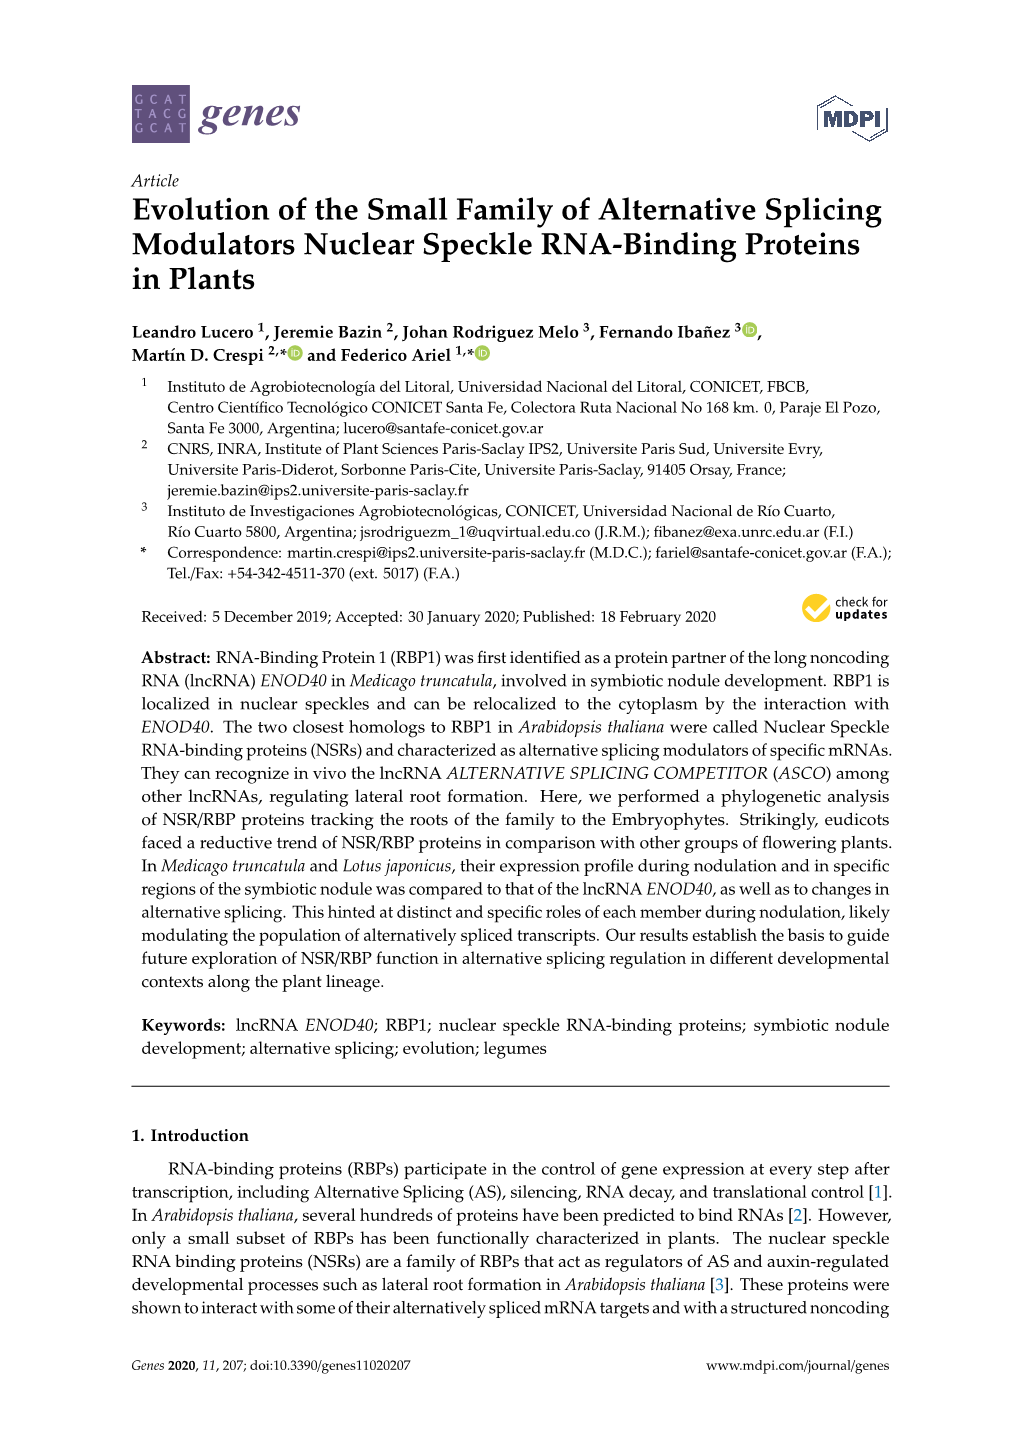 Evolution of the Small Family of Alternative Splicing Modulators Nuclear Speckle RNA-Binding Proteins in Plants